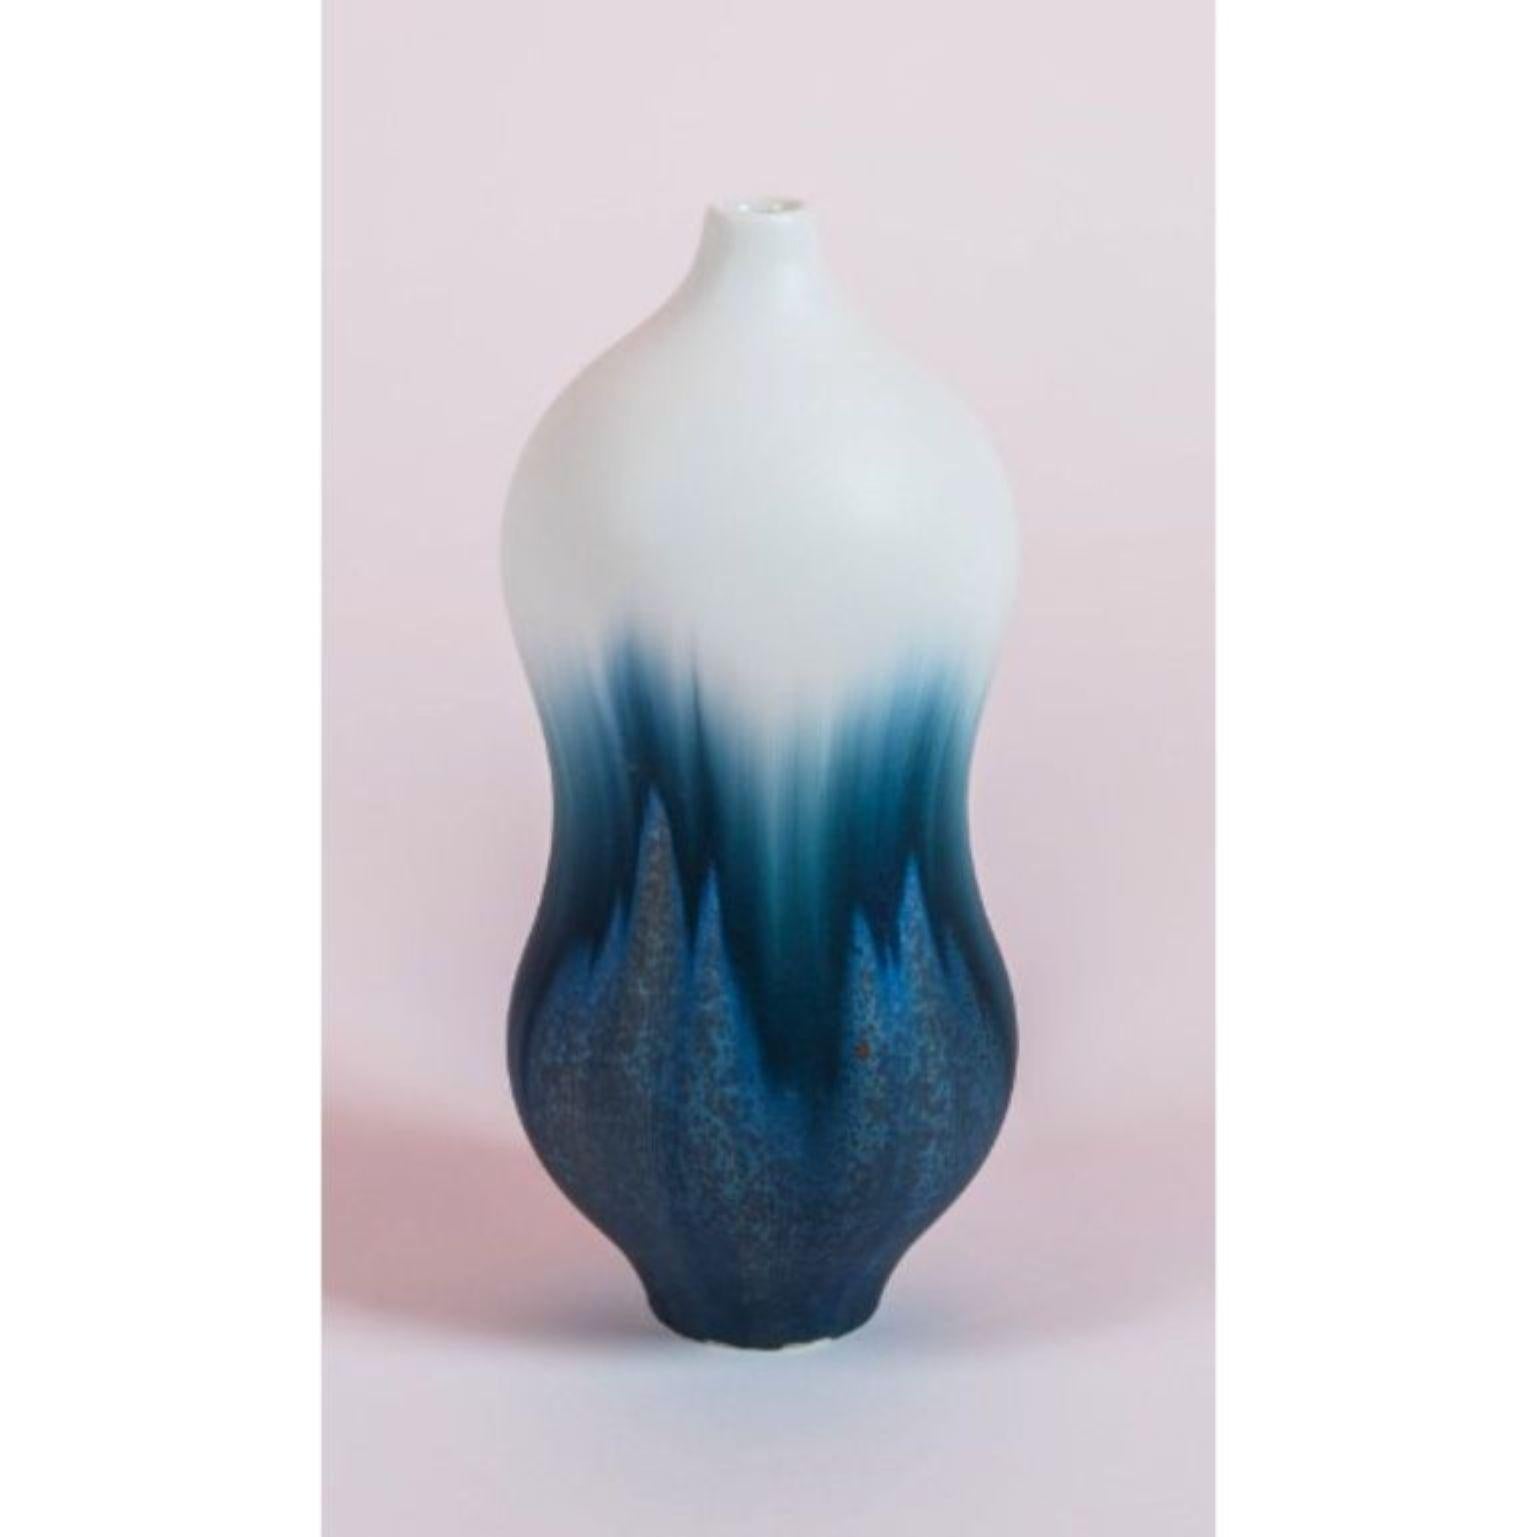 Element vase - Tall by Milan Pekar
Dimensions: D x H38 cm
Materials: Glaze, porcelain

Hand- crafted in the Czech Republic. 

Also available: different colors and patterns

Established own studio August 2009 – Focus mainly on porcelain,